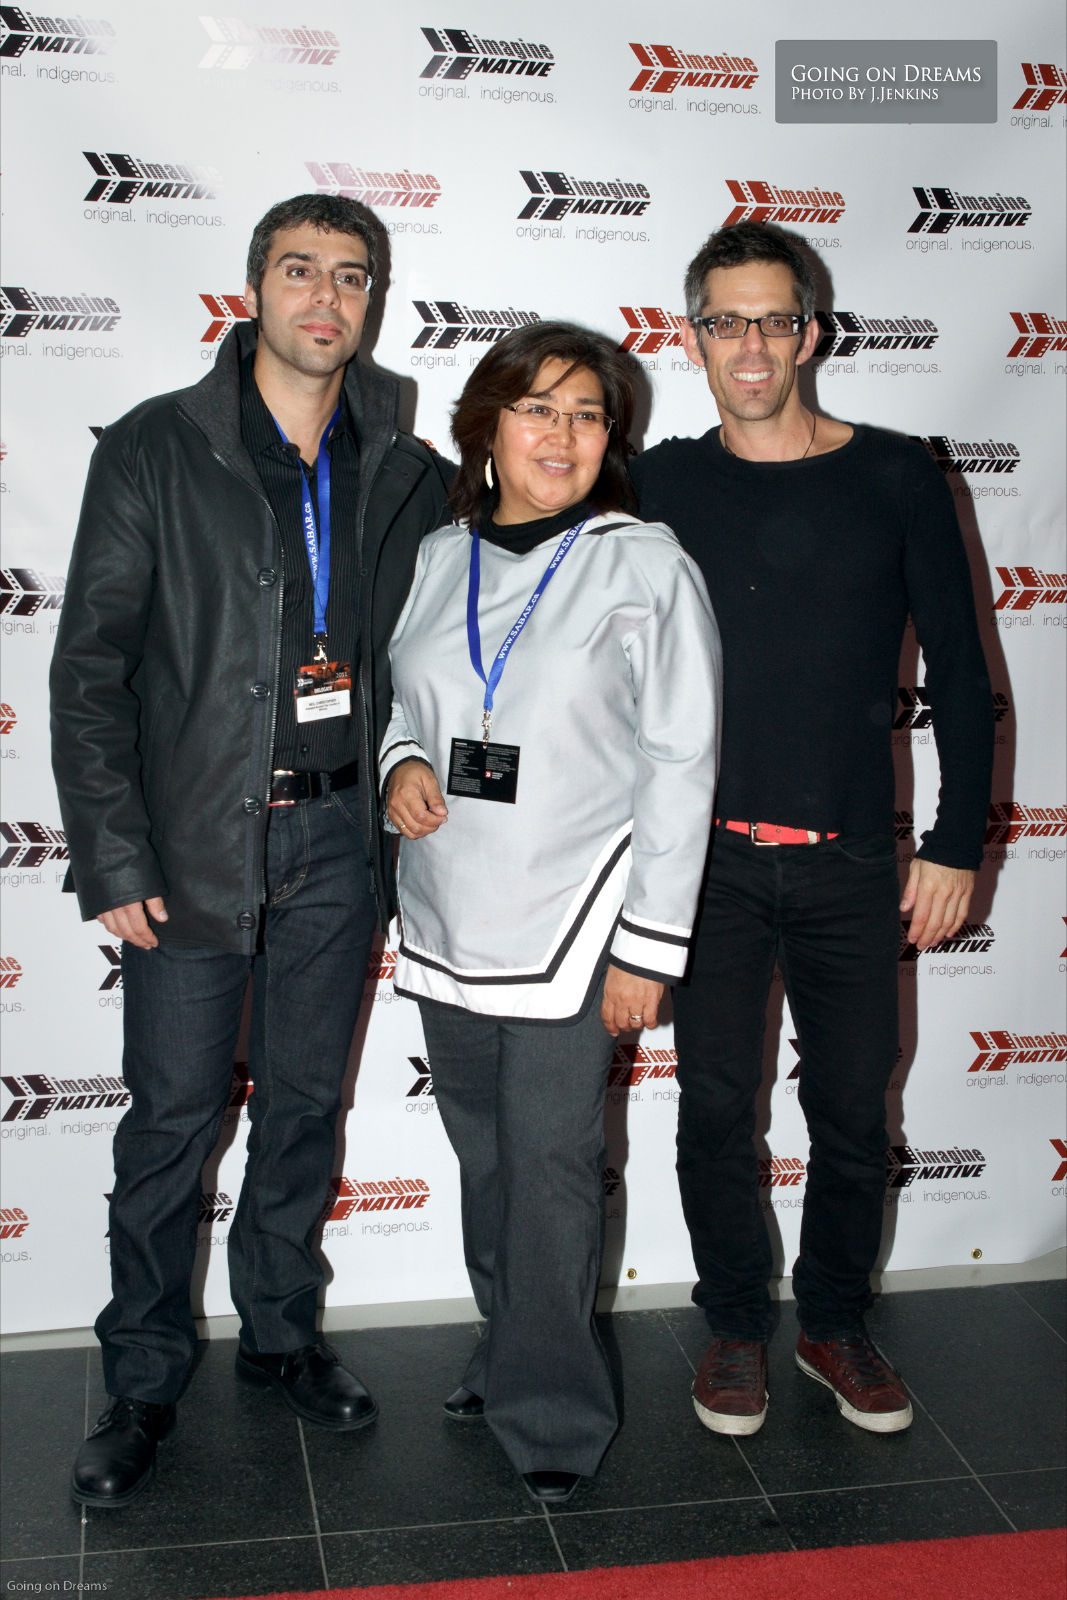 At the TIFF Lightbox during the premiere of Amaqqut Nunaat: The Country of Wolves (October 2011)